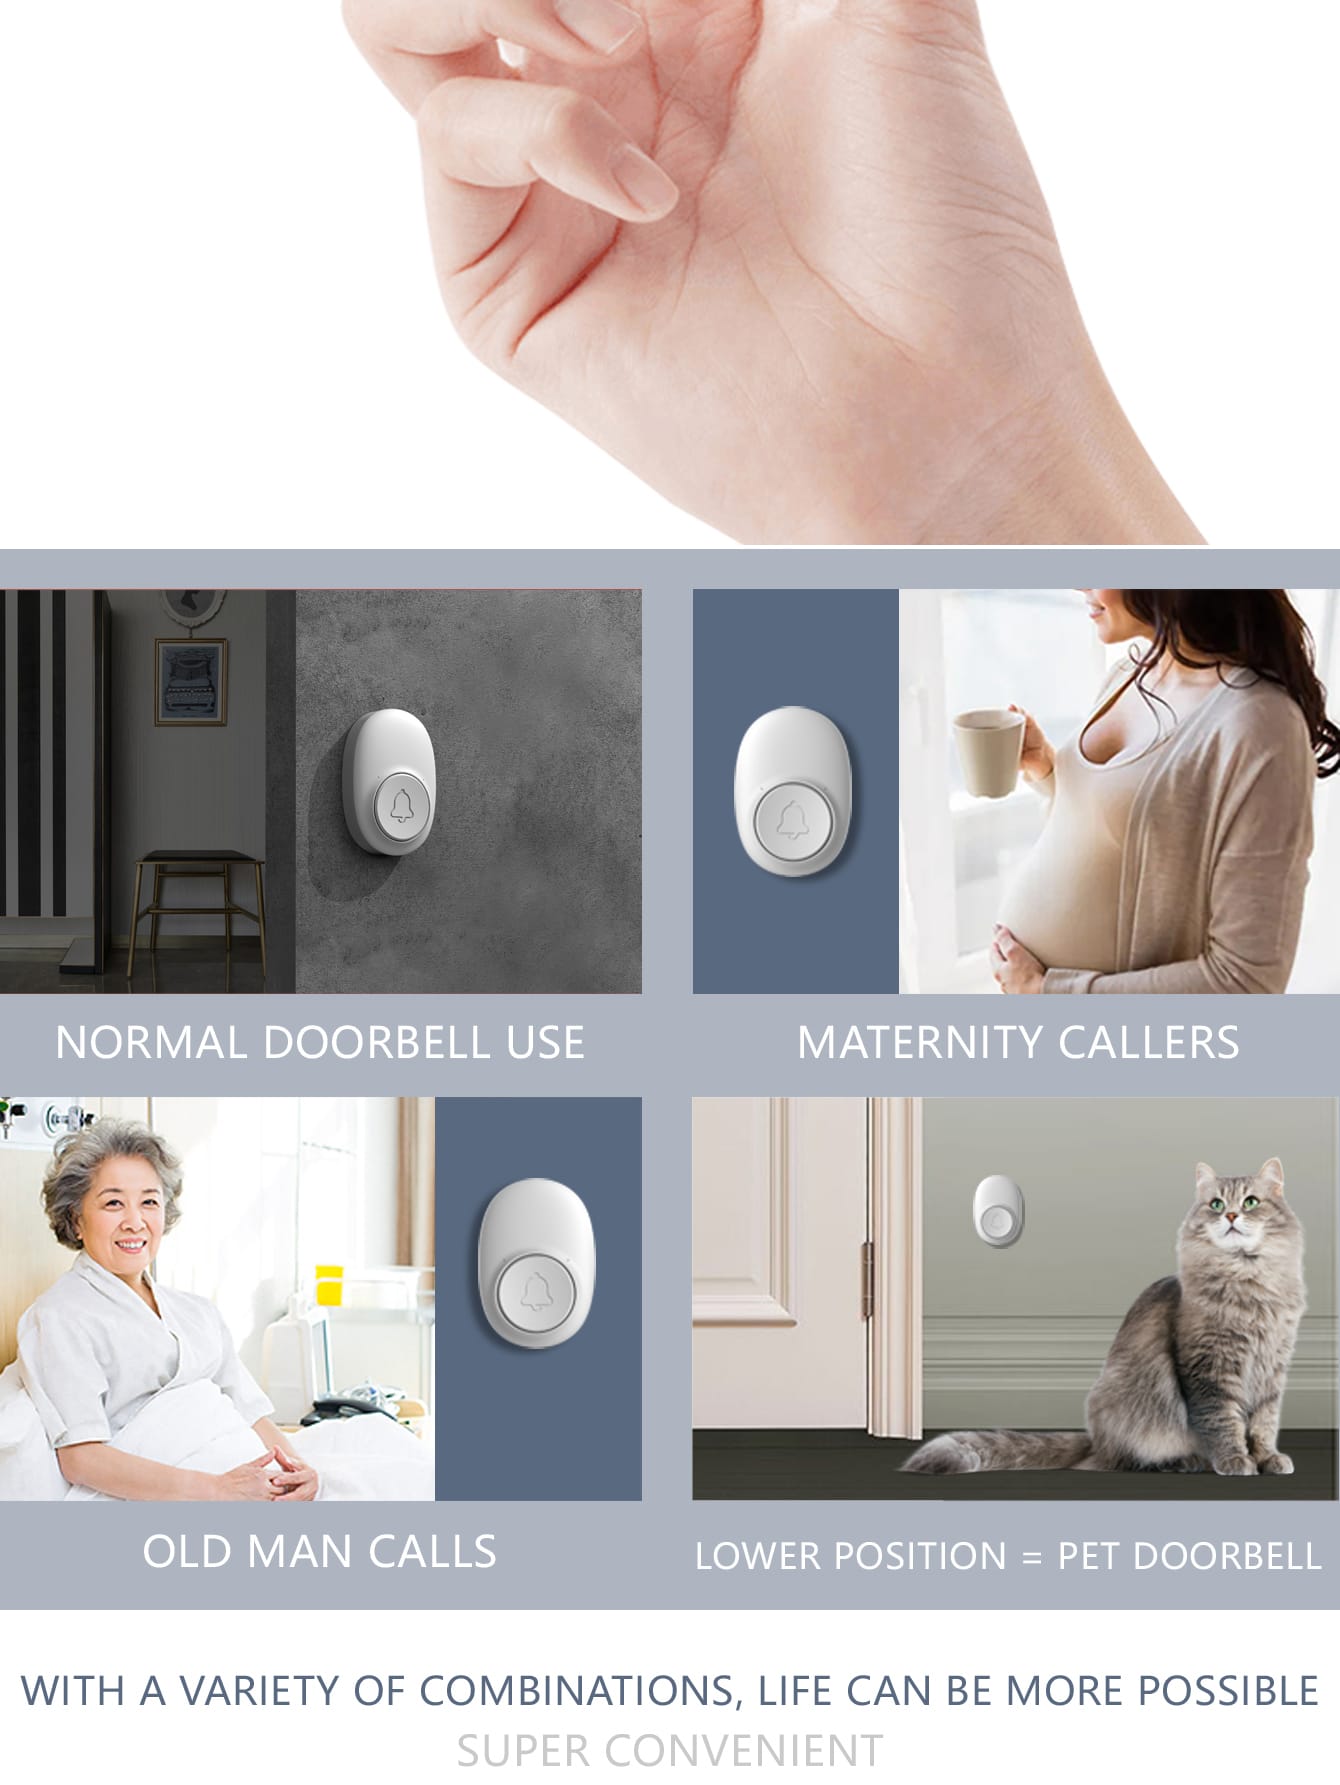 Wireless Intelligent Doorbell With Remote Control Button And Waterproof Electronic Receiver, Including 1 Transmitter, 1 Receiver, 1 Battery, 1 User Manual, Double-sided Tape And 2 Screws, Suitable For Uk/us/eu Standards, Ideal For Elderly. Sleek--8